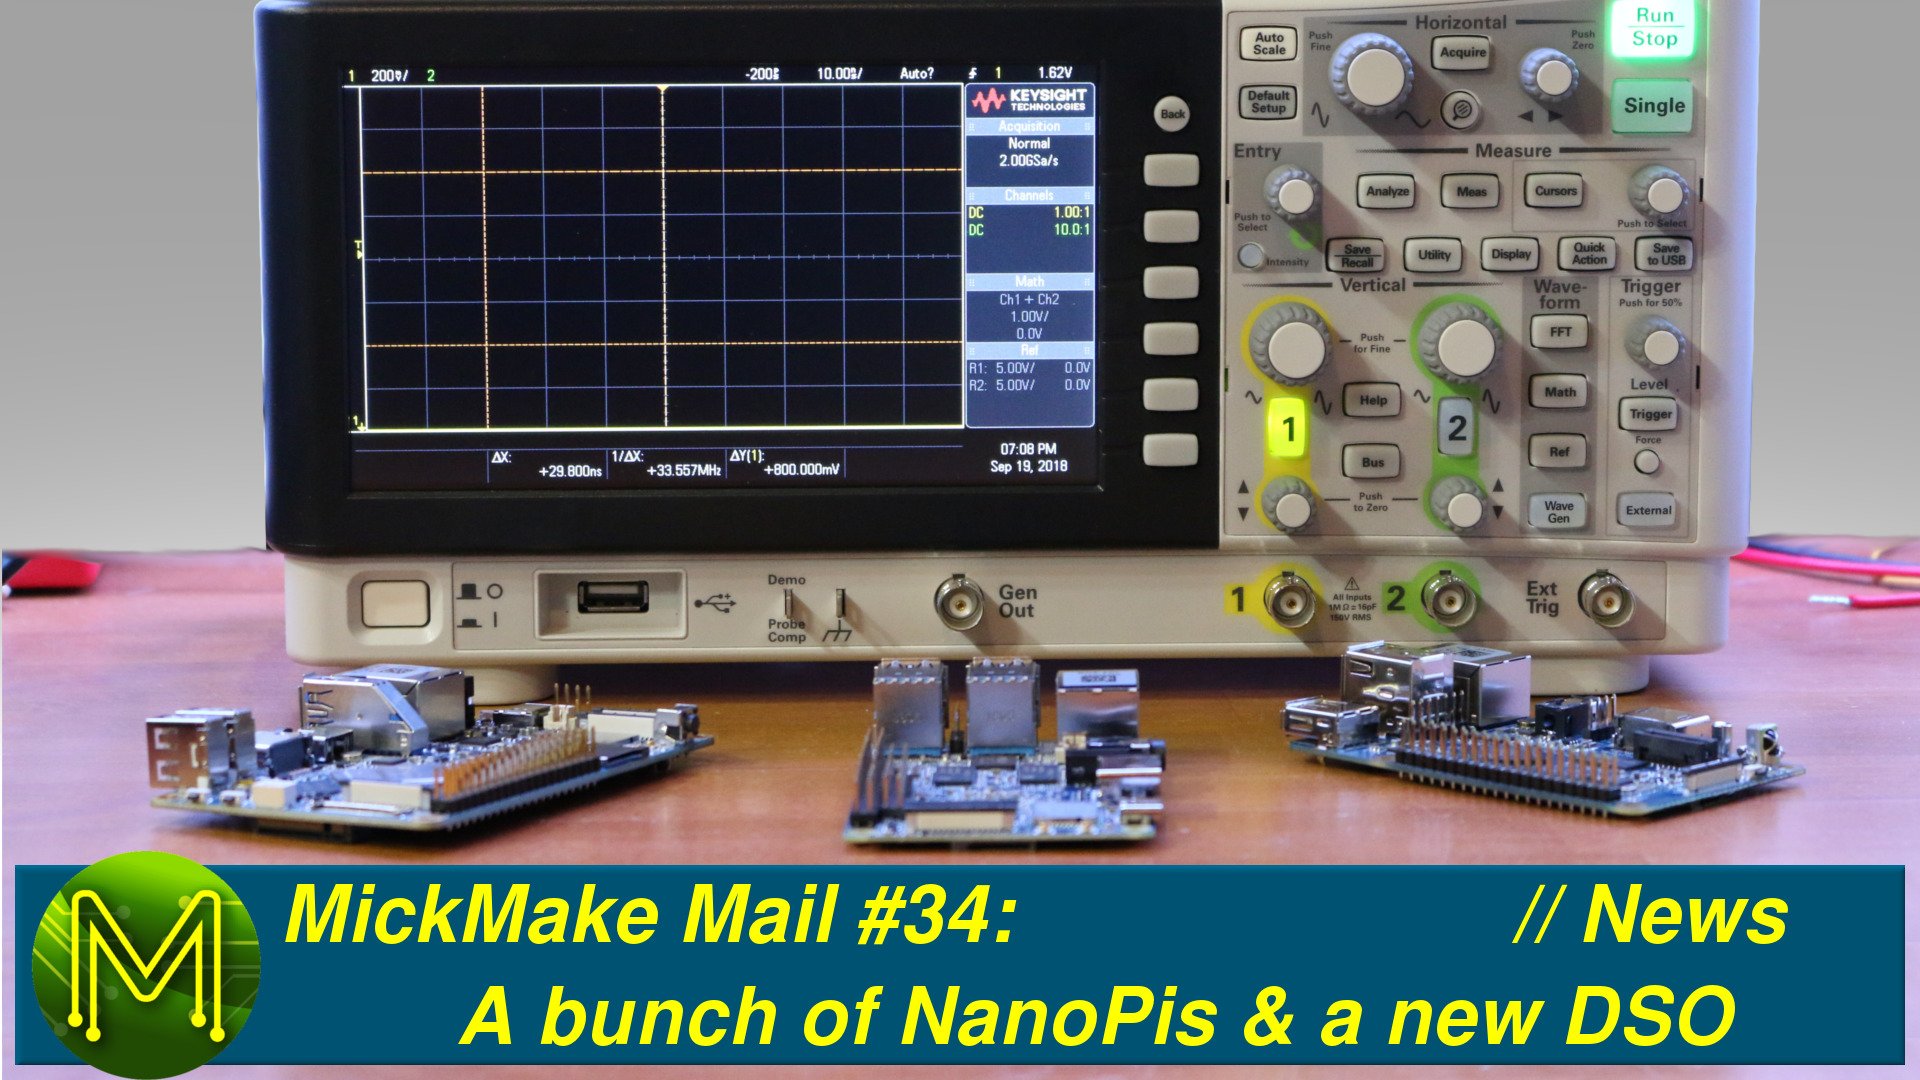 MickMake Mail #34: A bunch of NanoPis & a new DSO.